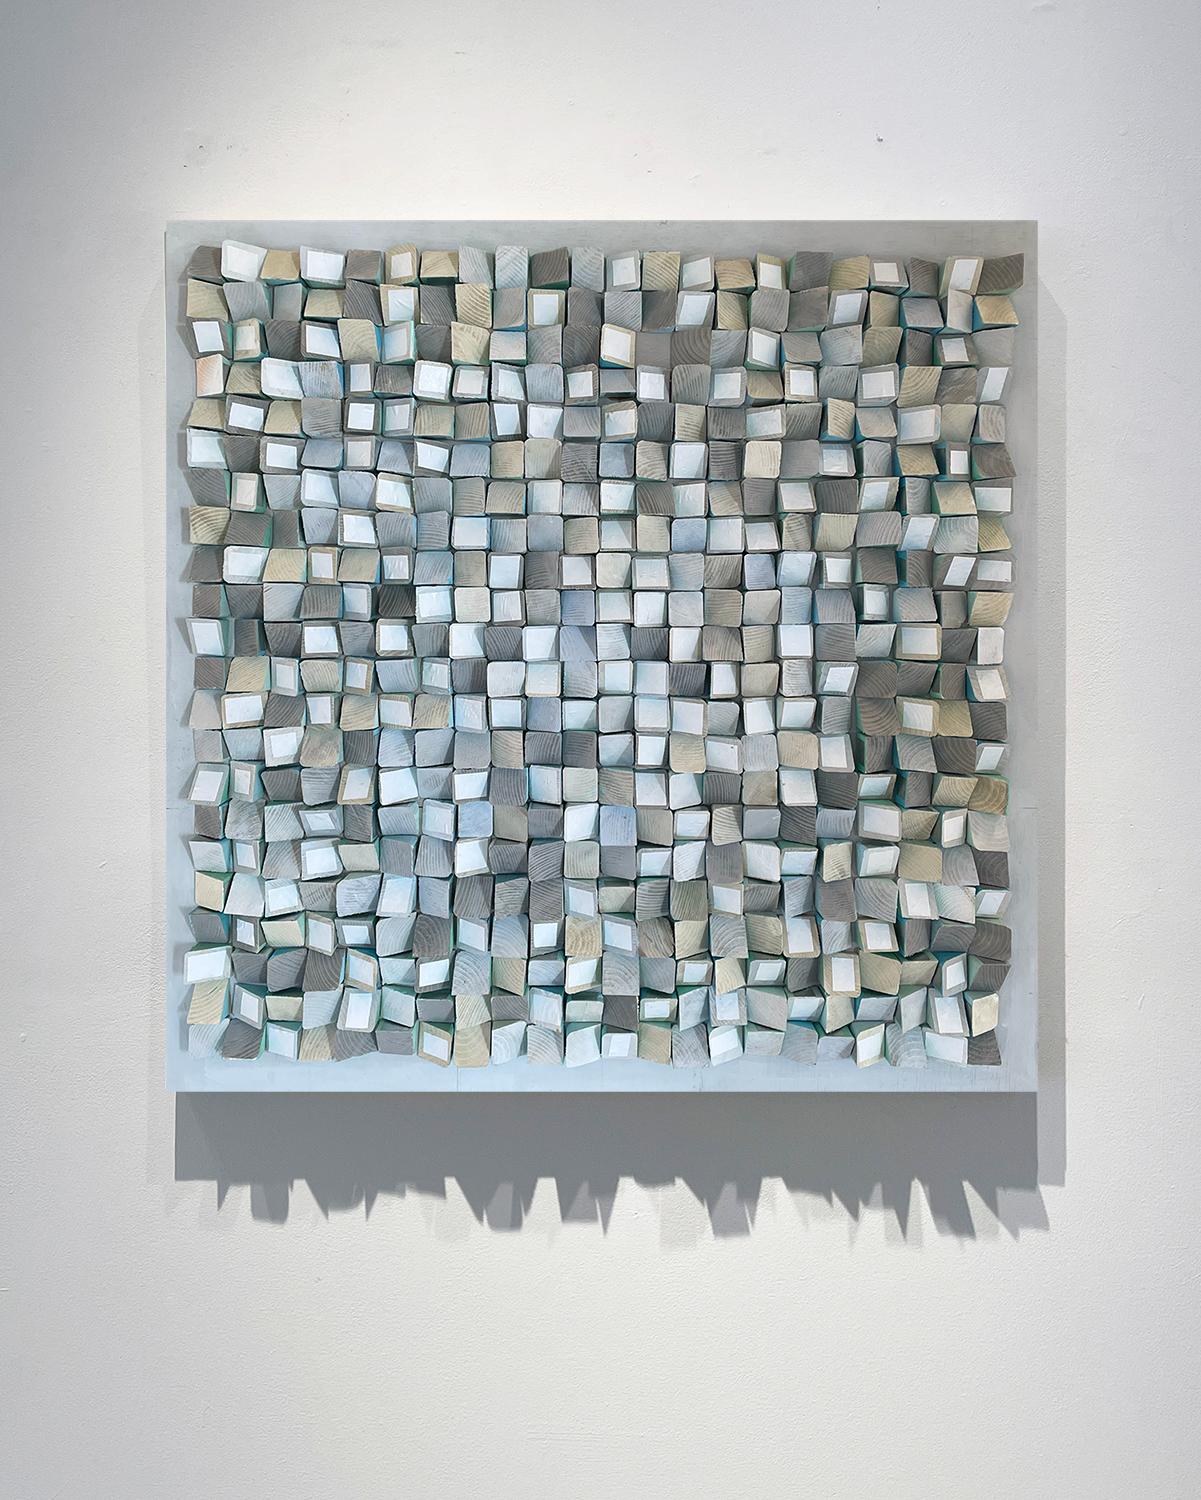 Abstract Geometric wood three-dimensional wall sculpture in light blue, white, and light grey
Painted wood and collaged paper on panel
36 x 36 x 2.5 inches
Hangs flush to the wall with hanging wire
Signed on verso
Clean, painted wood edges so